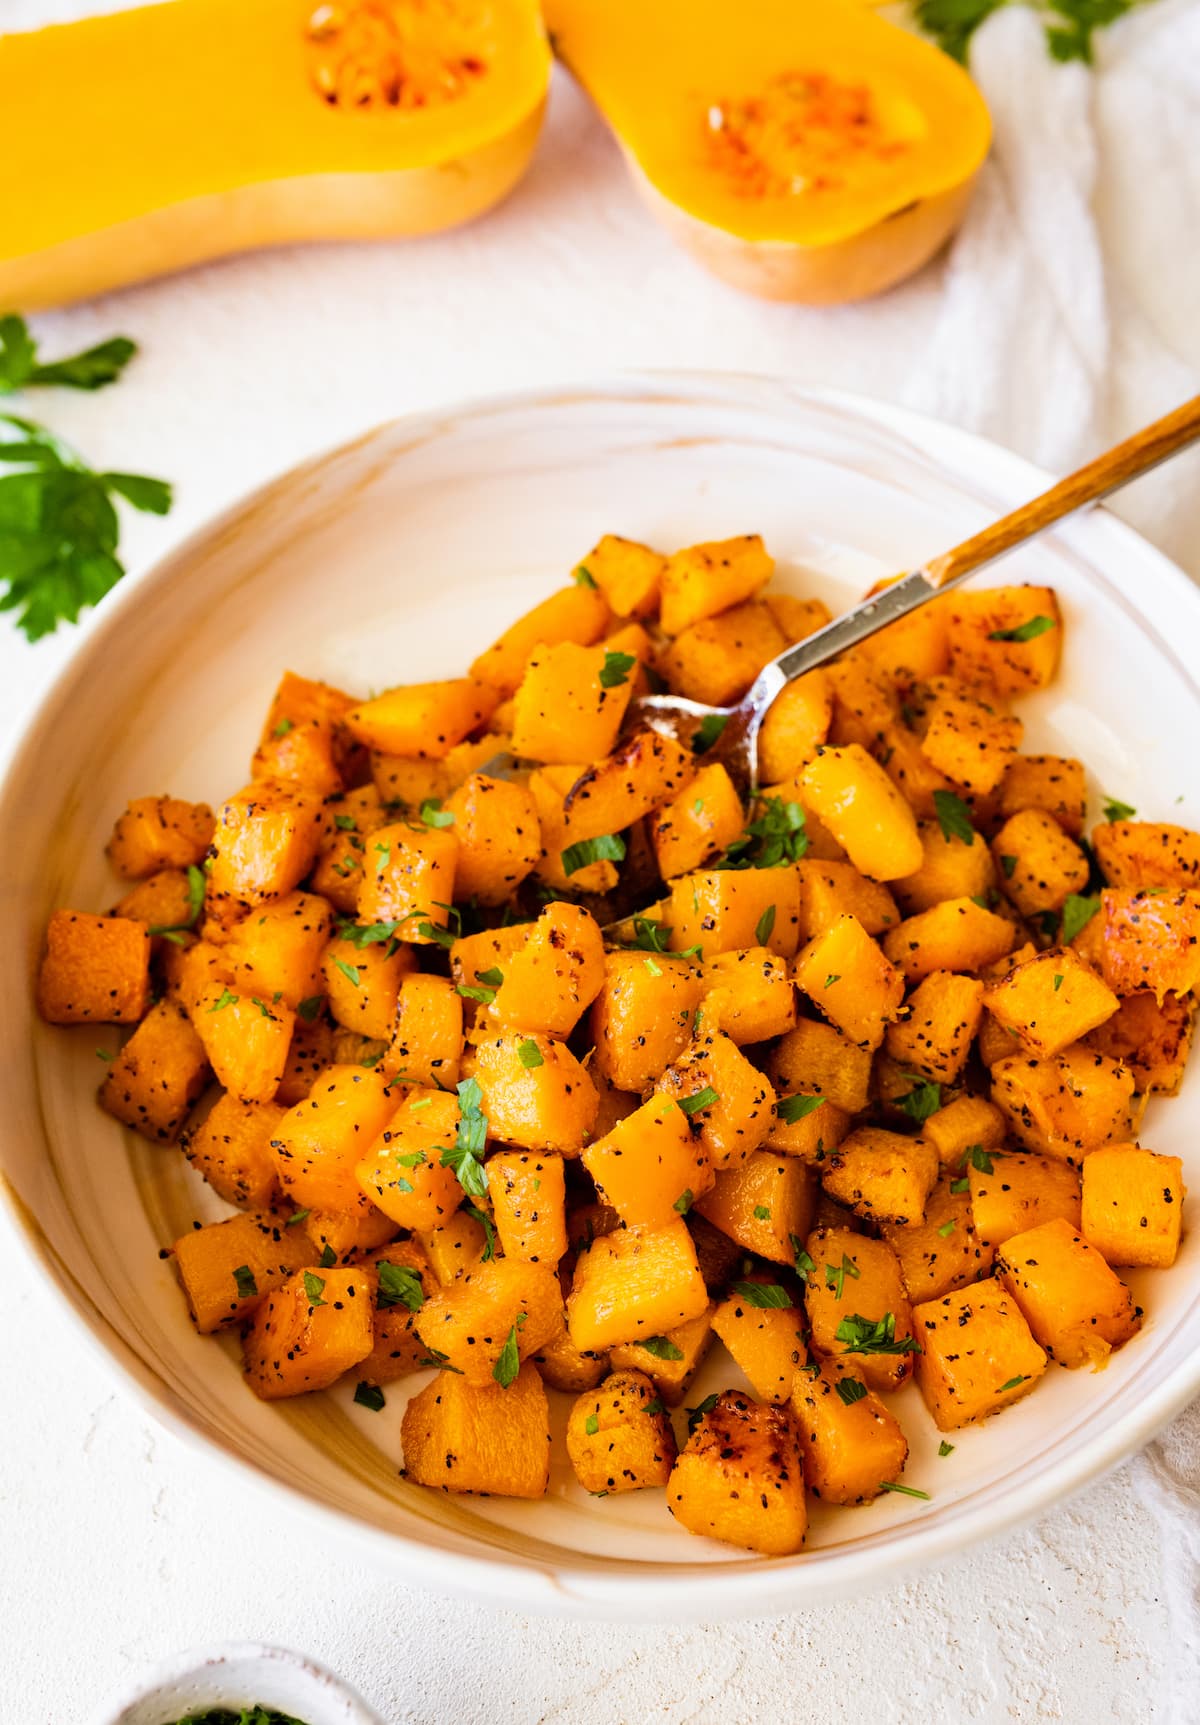 Seasoned and roasted butternut squash cut into cubes in a bowl.